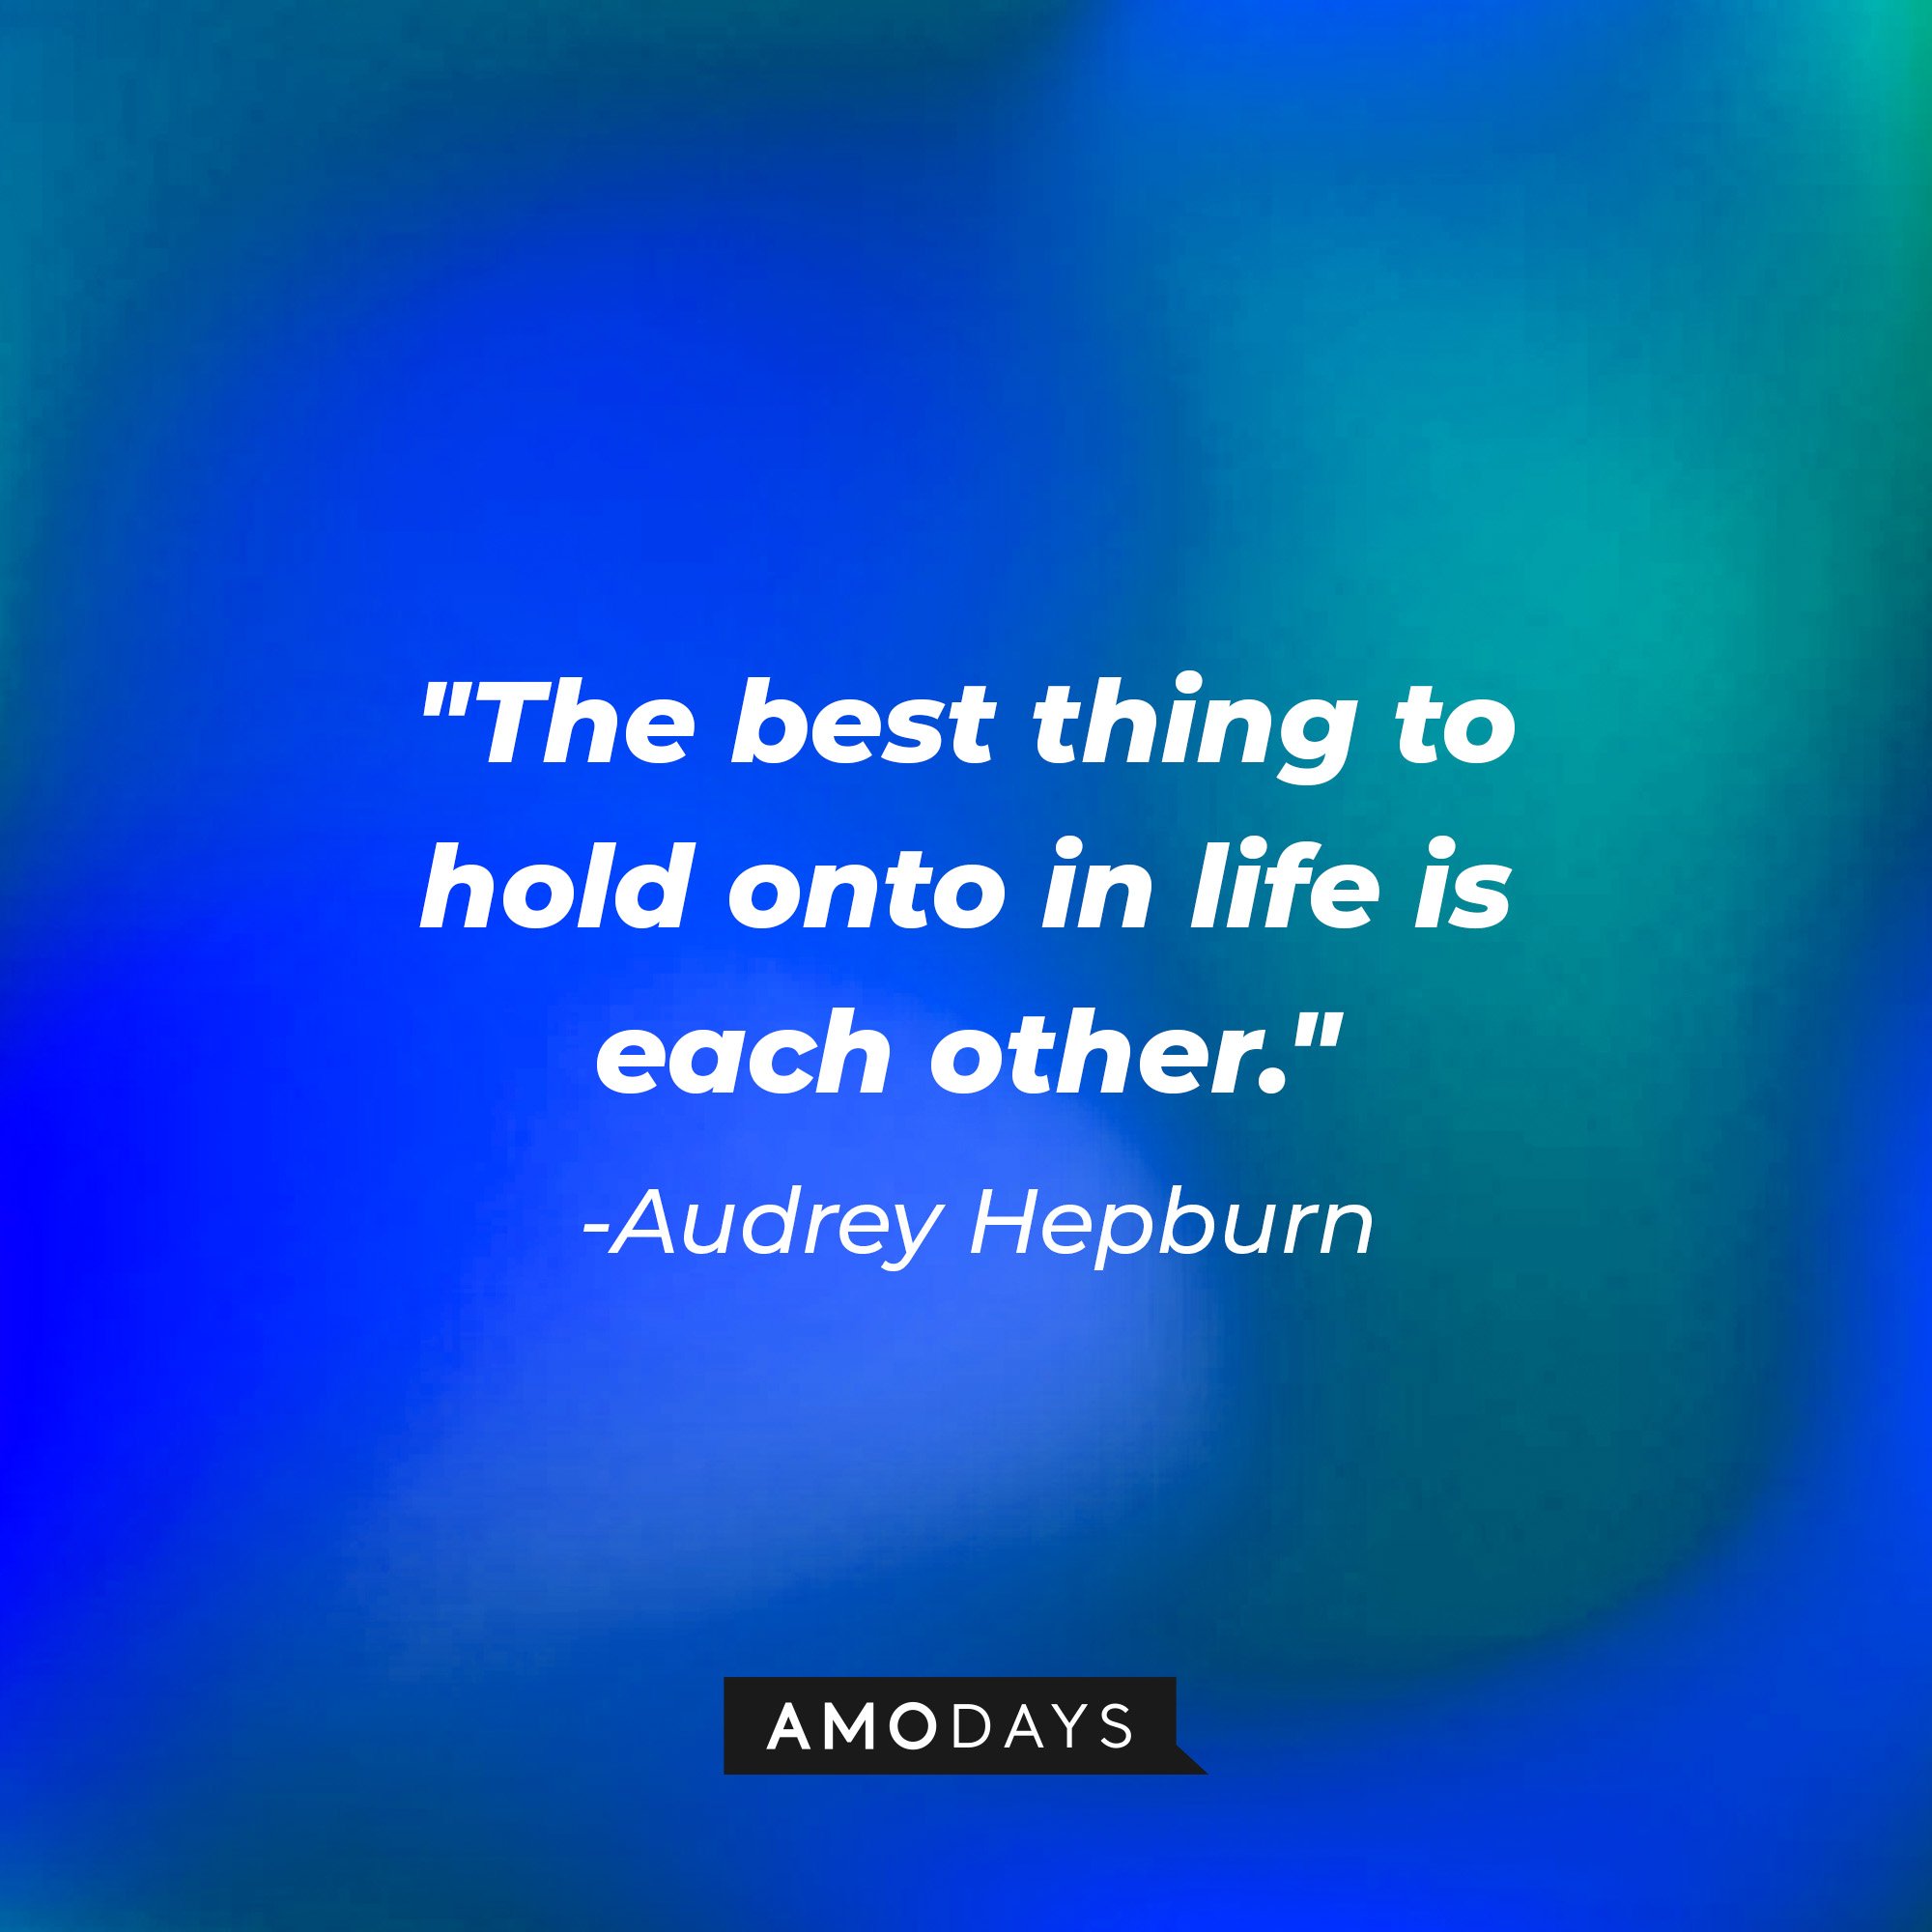 Audrey Hepburn's quote: "The best thing to hold onto in life is each other."| Image: AmoDays